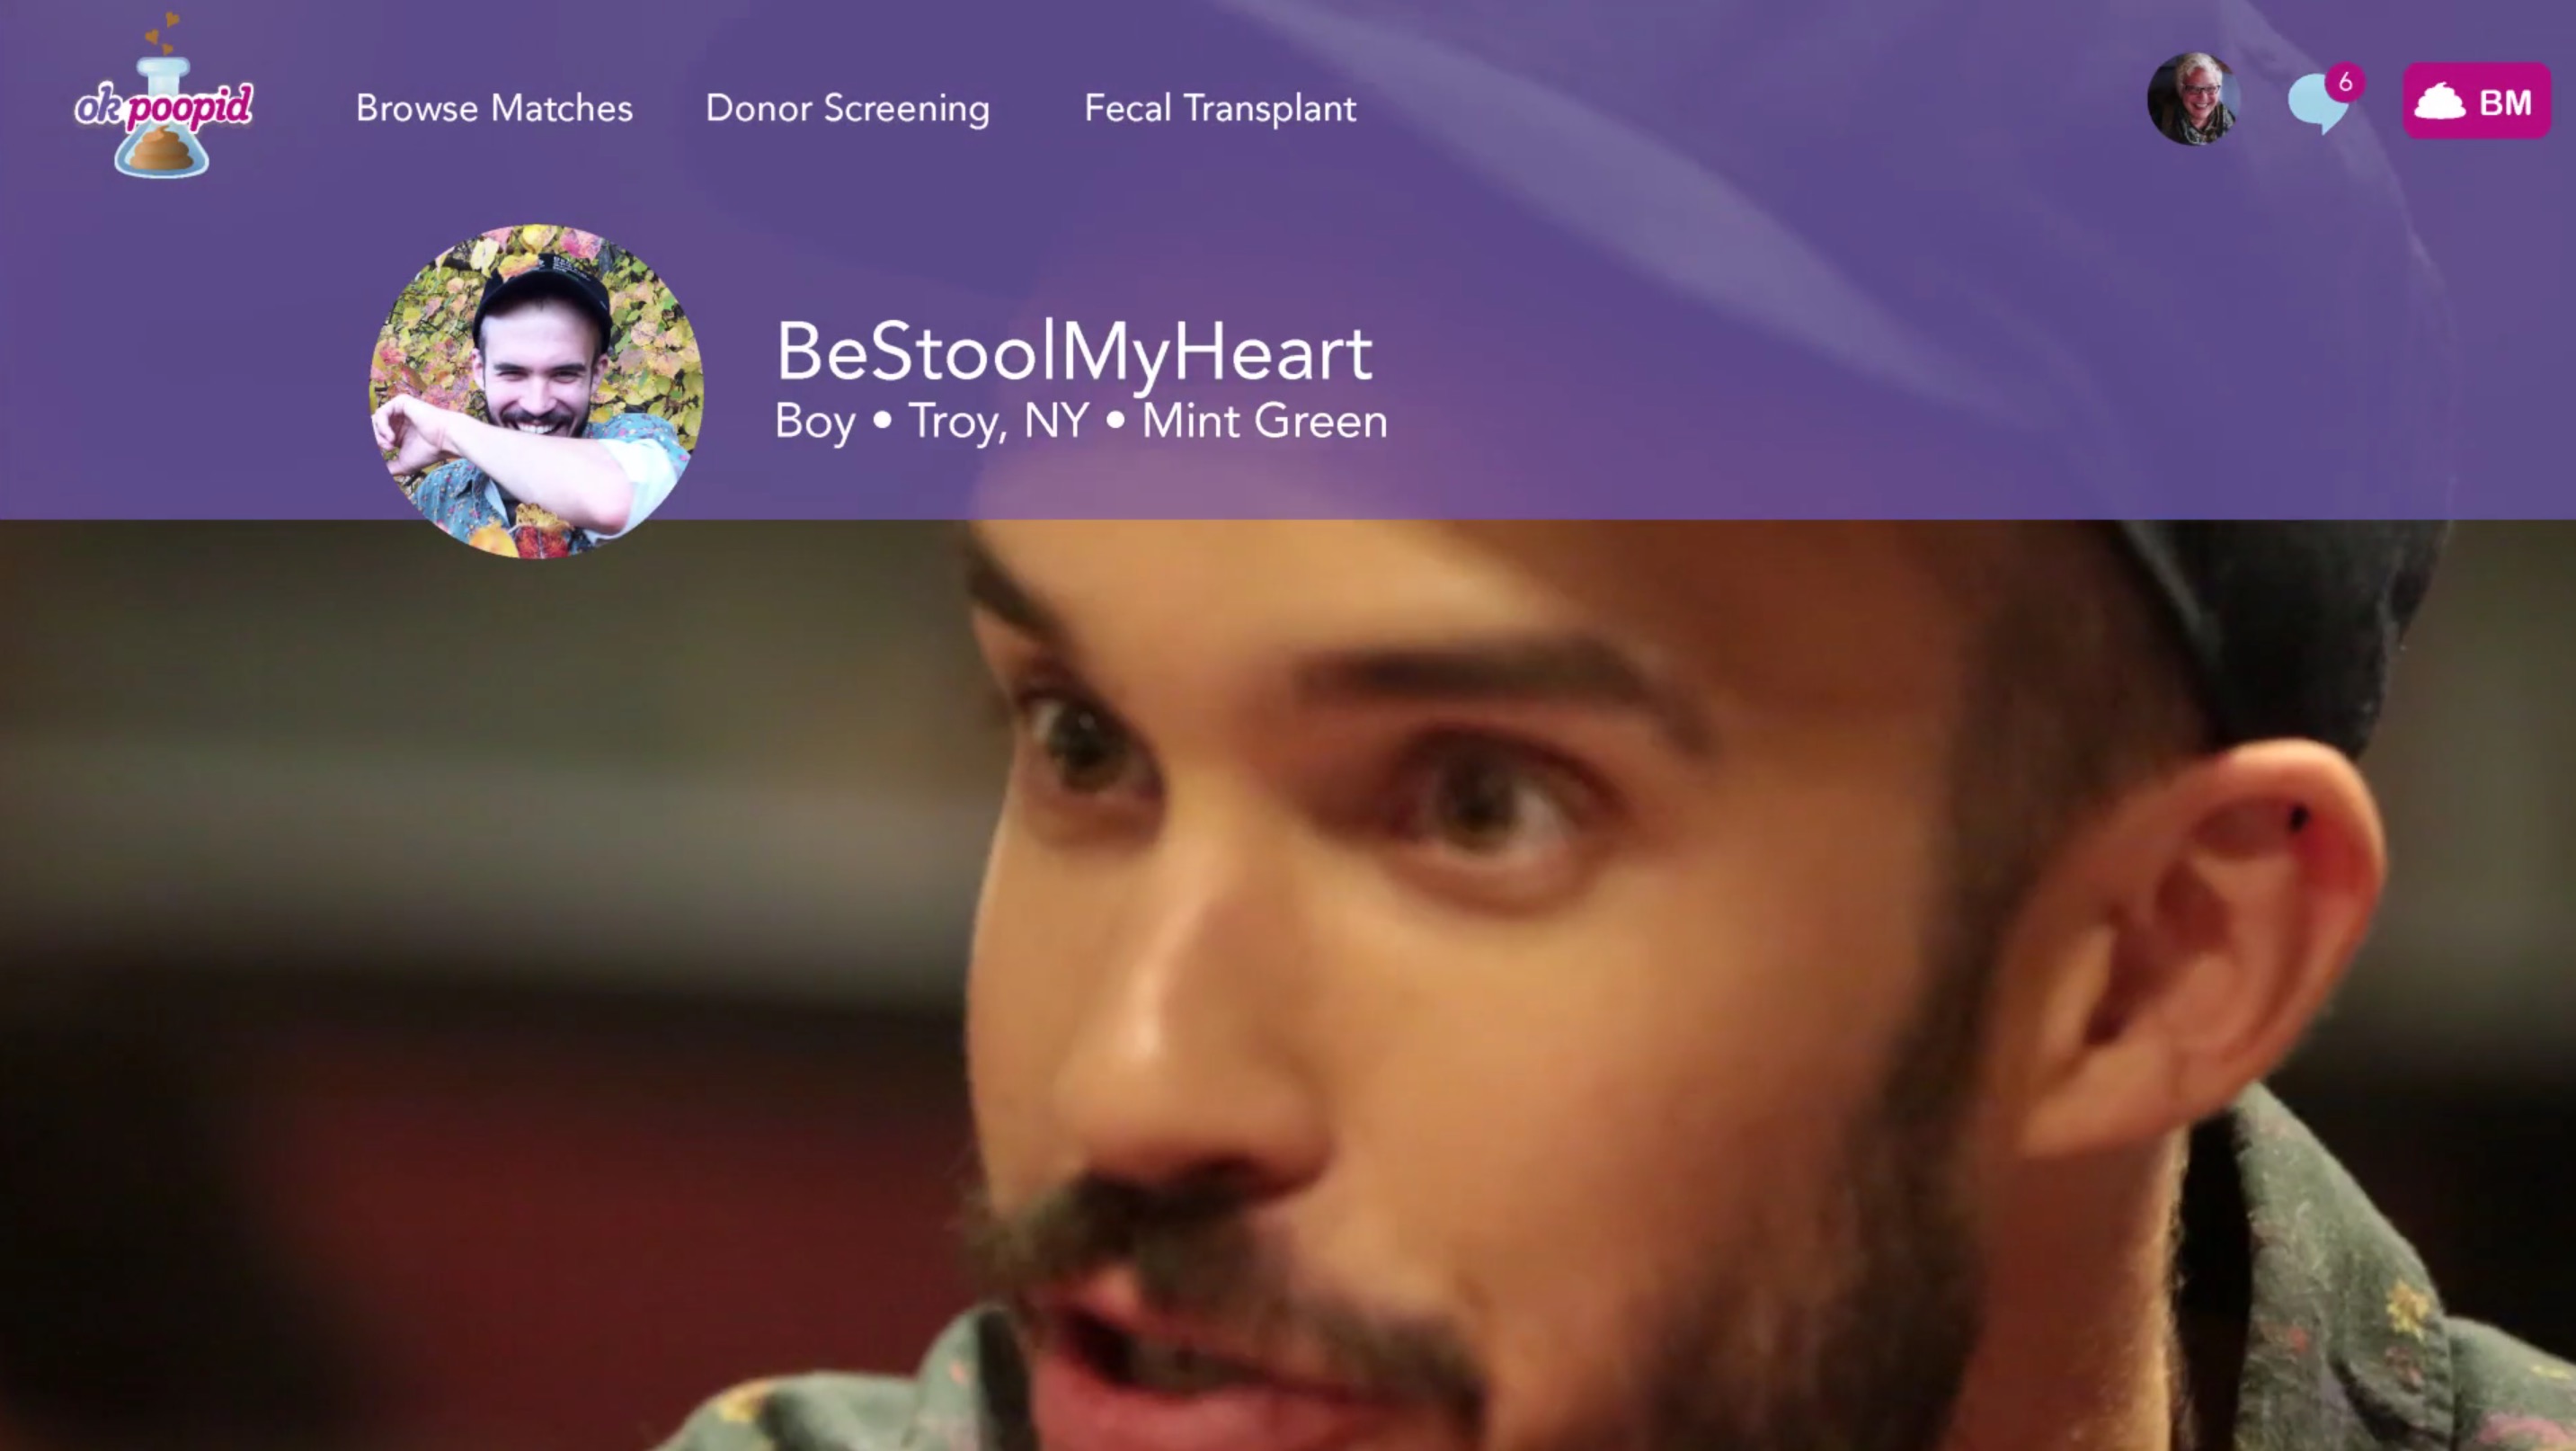 Screenshot of a dating site with branding OKPoopid